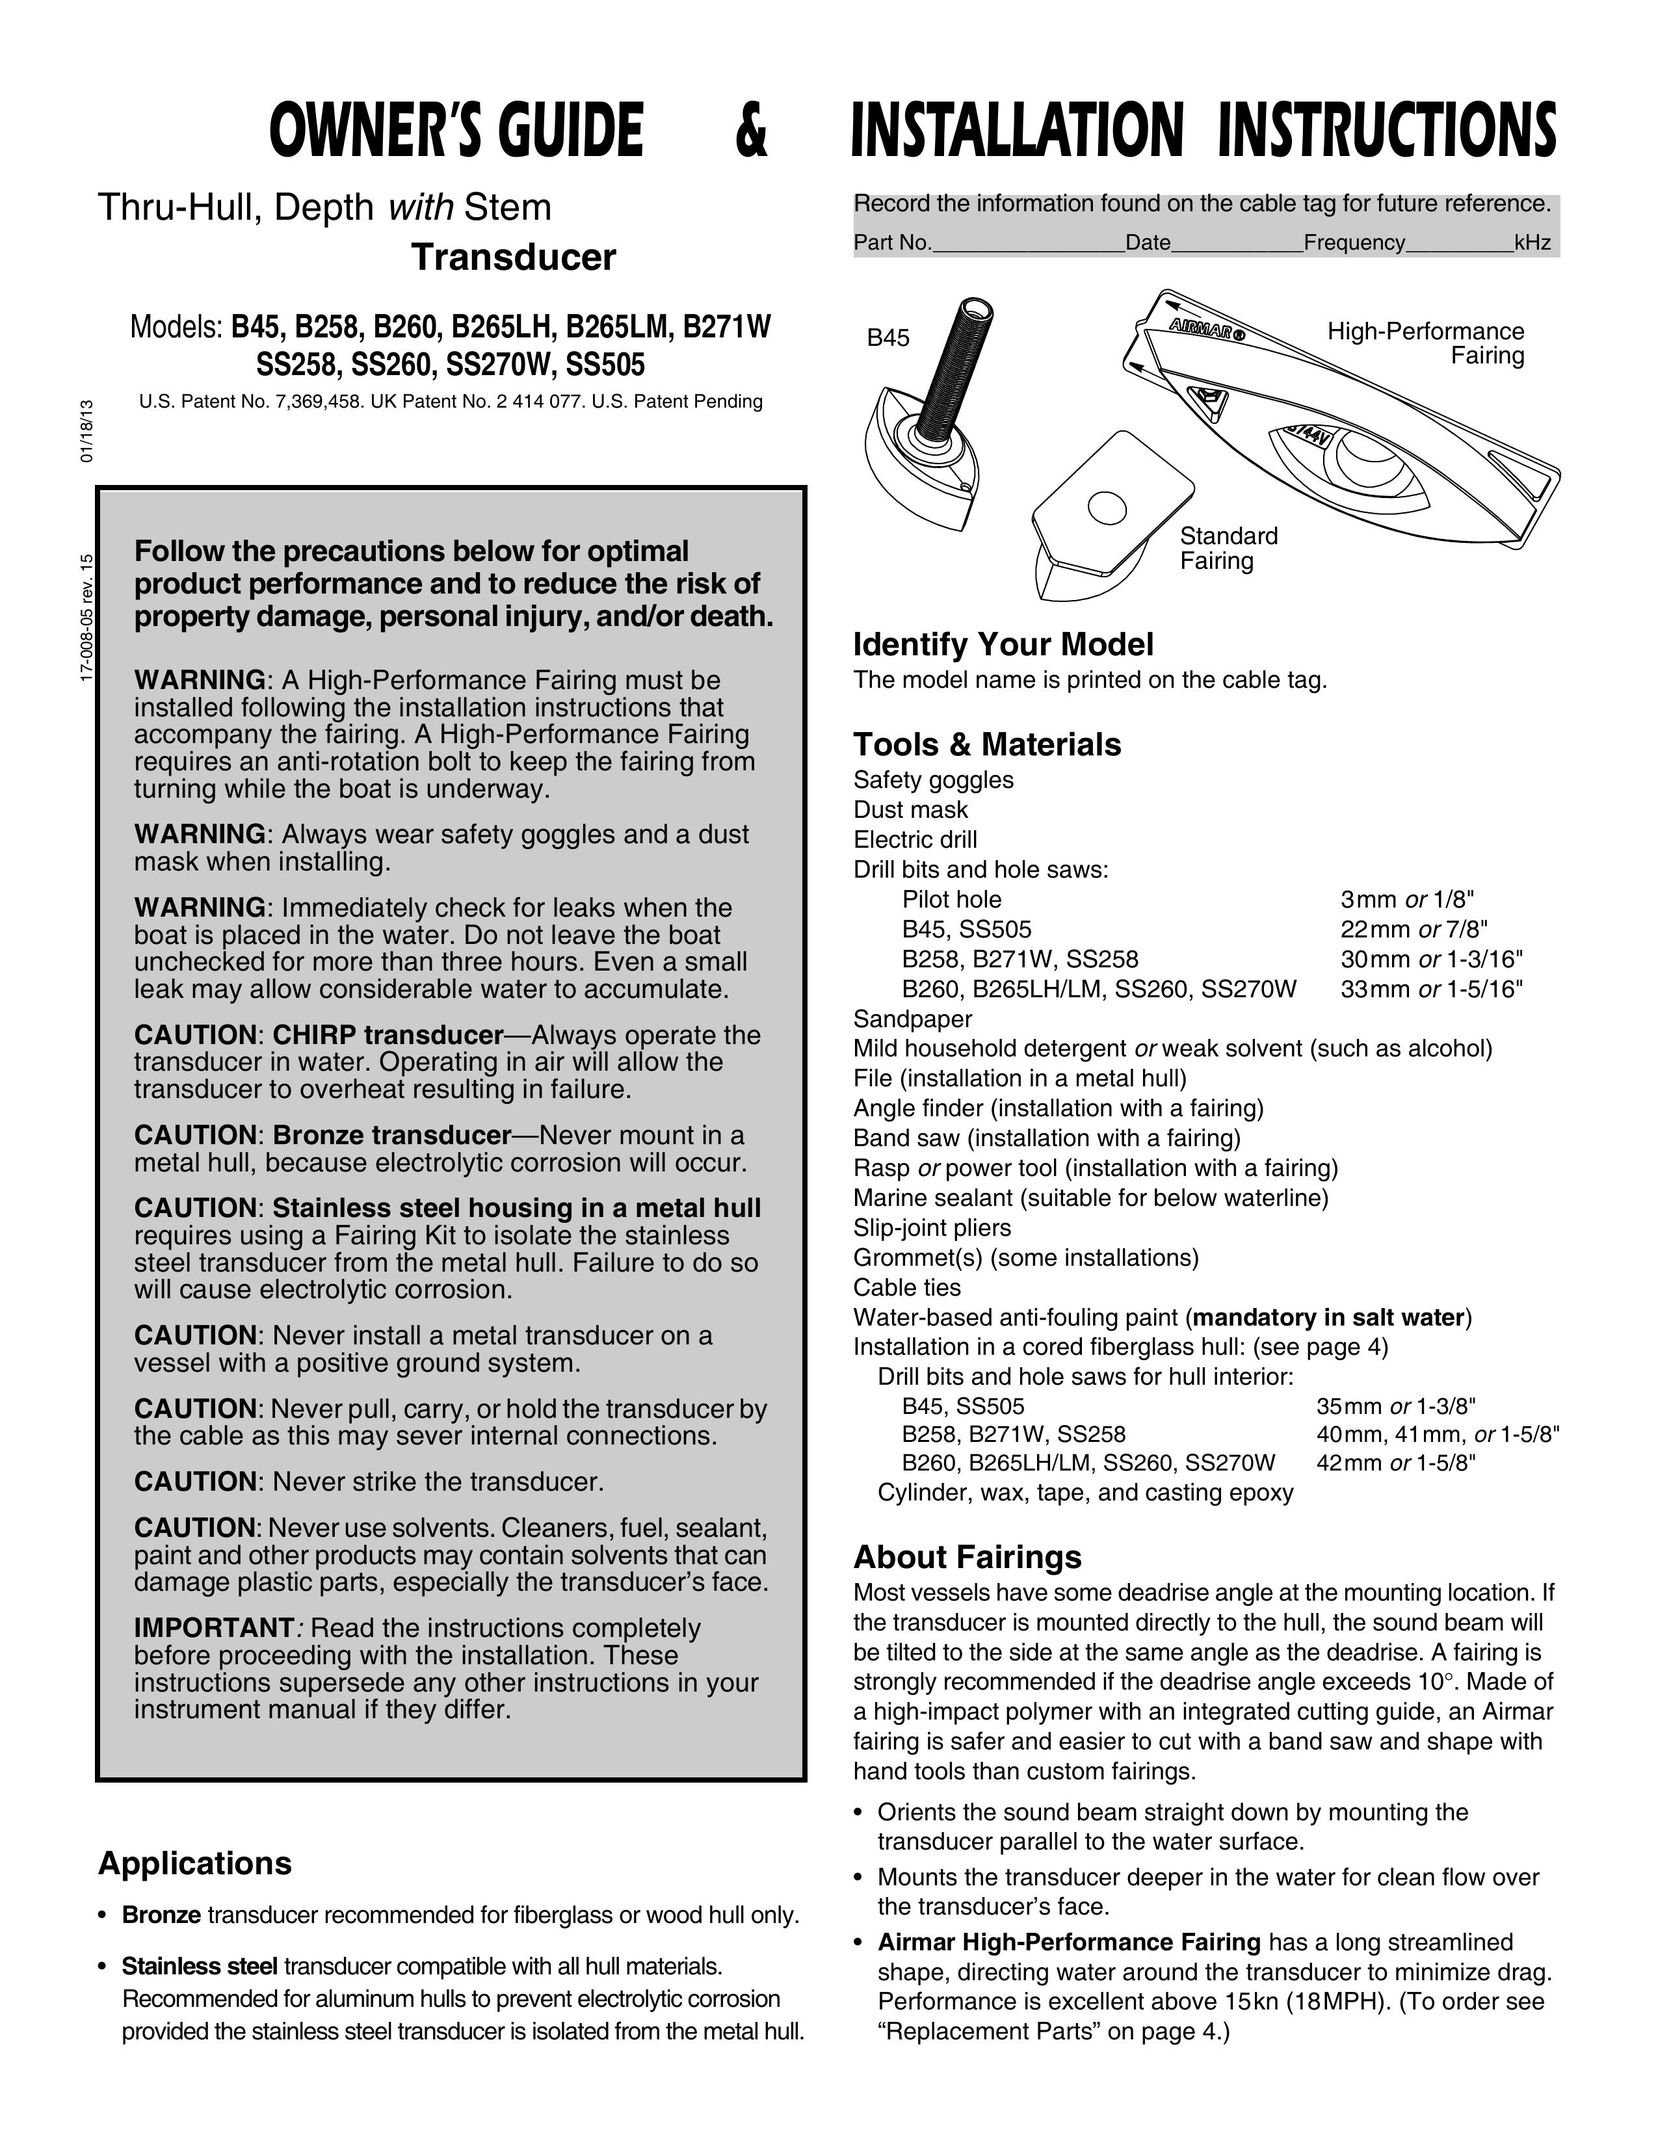 New Transducers SS260 Network Router User Manual